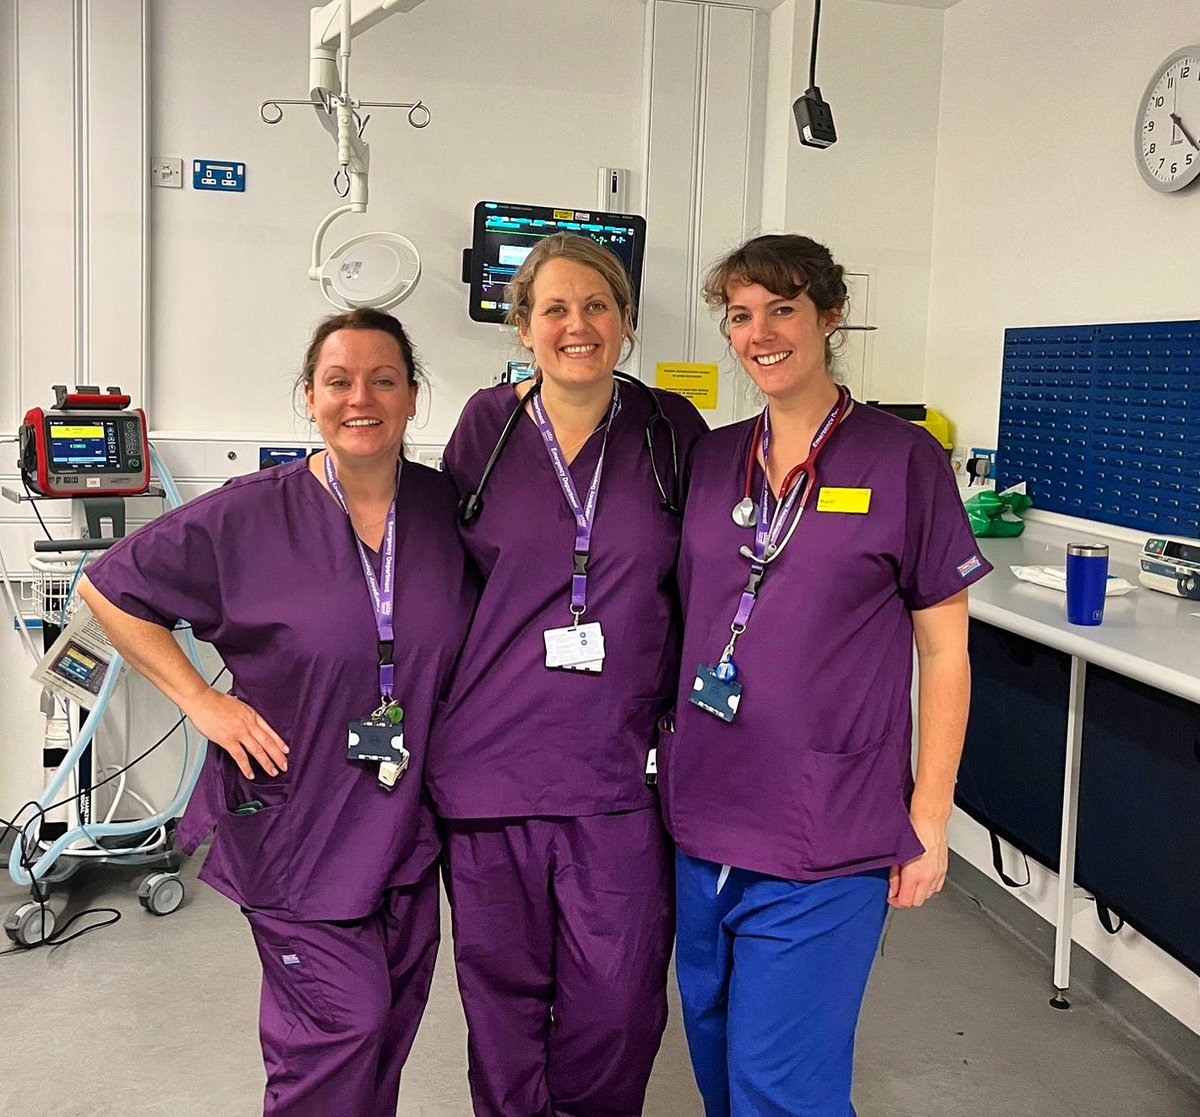 Last month we welcomed three new consultants, Hazel, Lily and Rachel, to our wonderful #teamed. Looking forward to working with you #teamed #newstarters #nbtproud @musomedic @lilsstanley